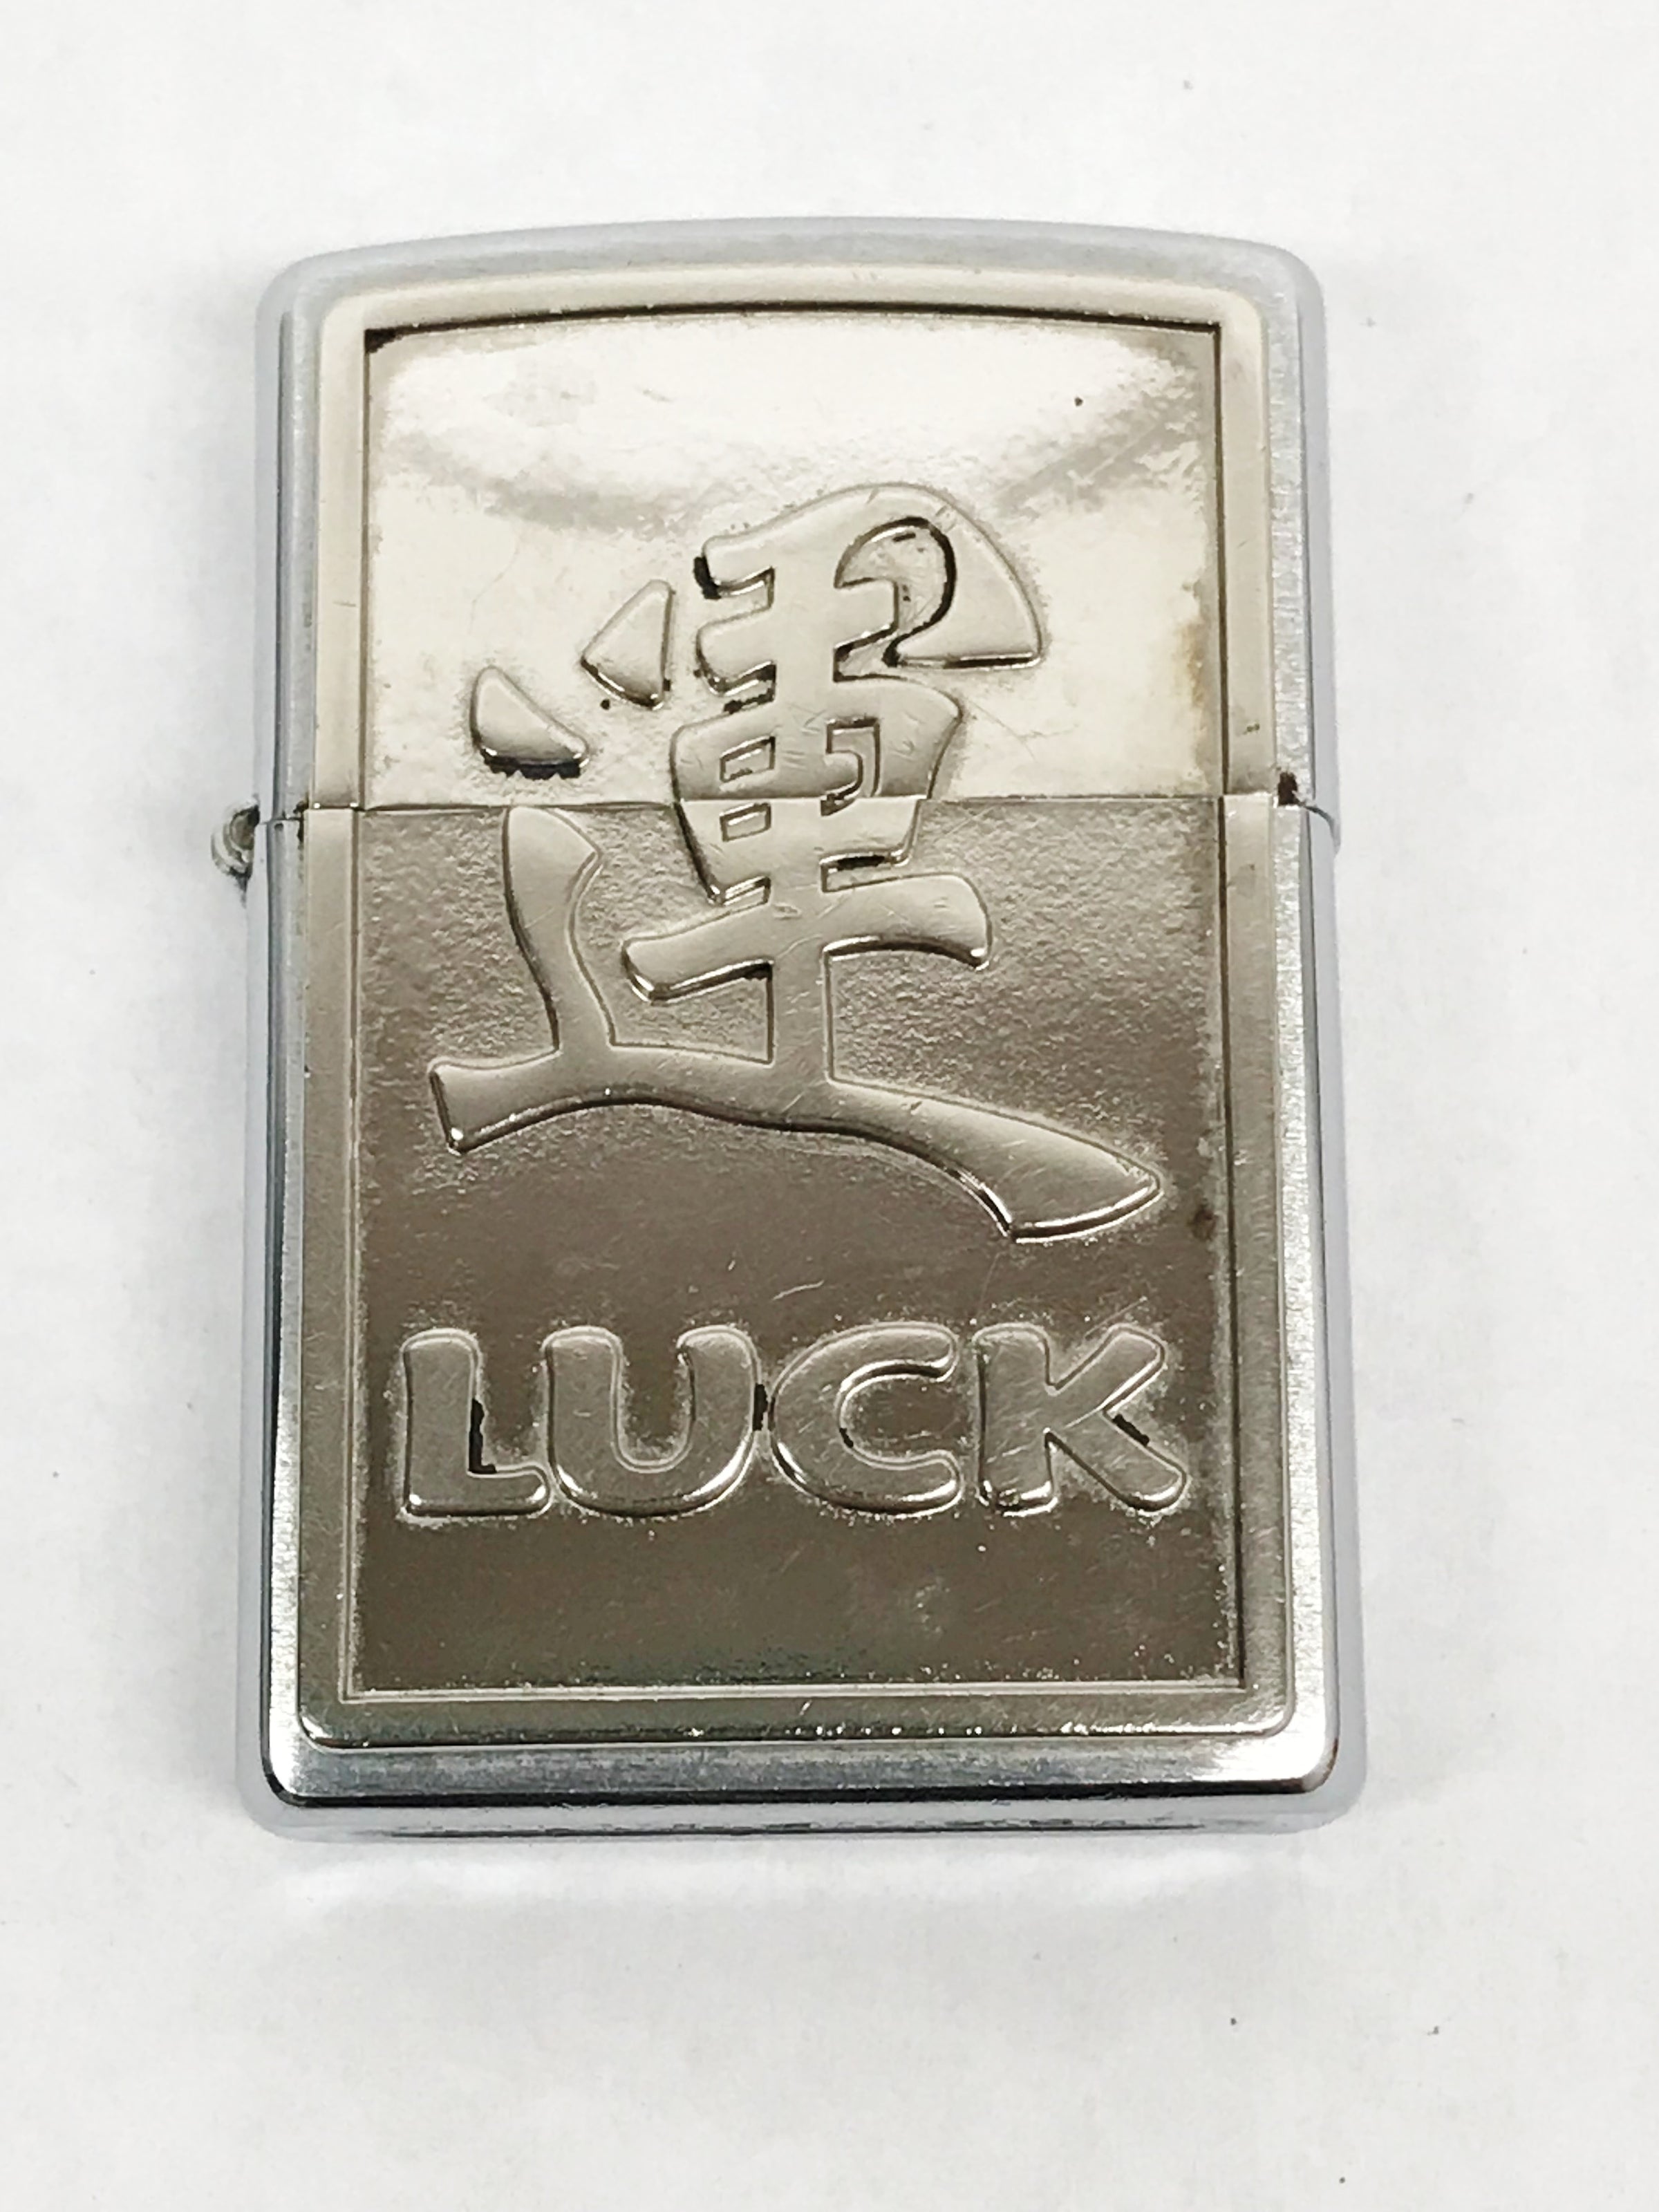 www.hersandhistreasures.com/products/2007-chinese-symbol-for-luck-brushed-chrome-zippo-lighter-usa